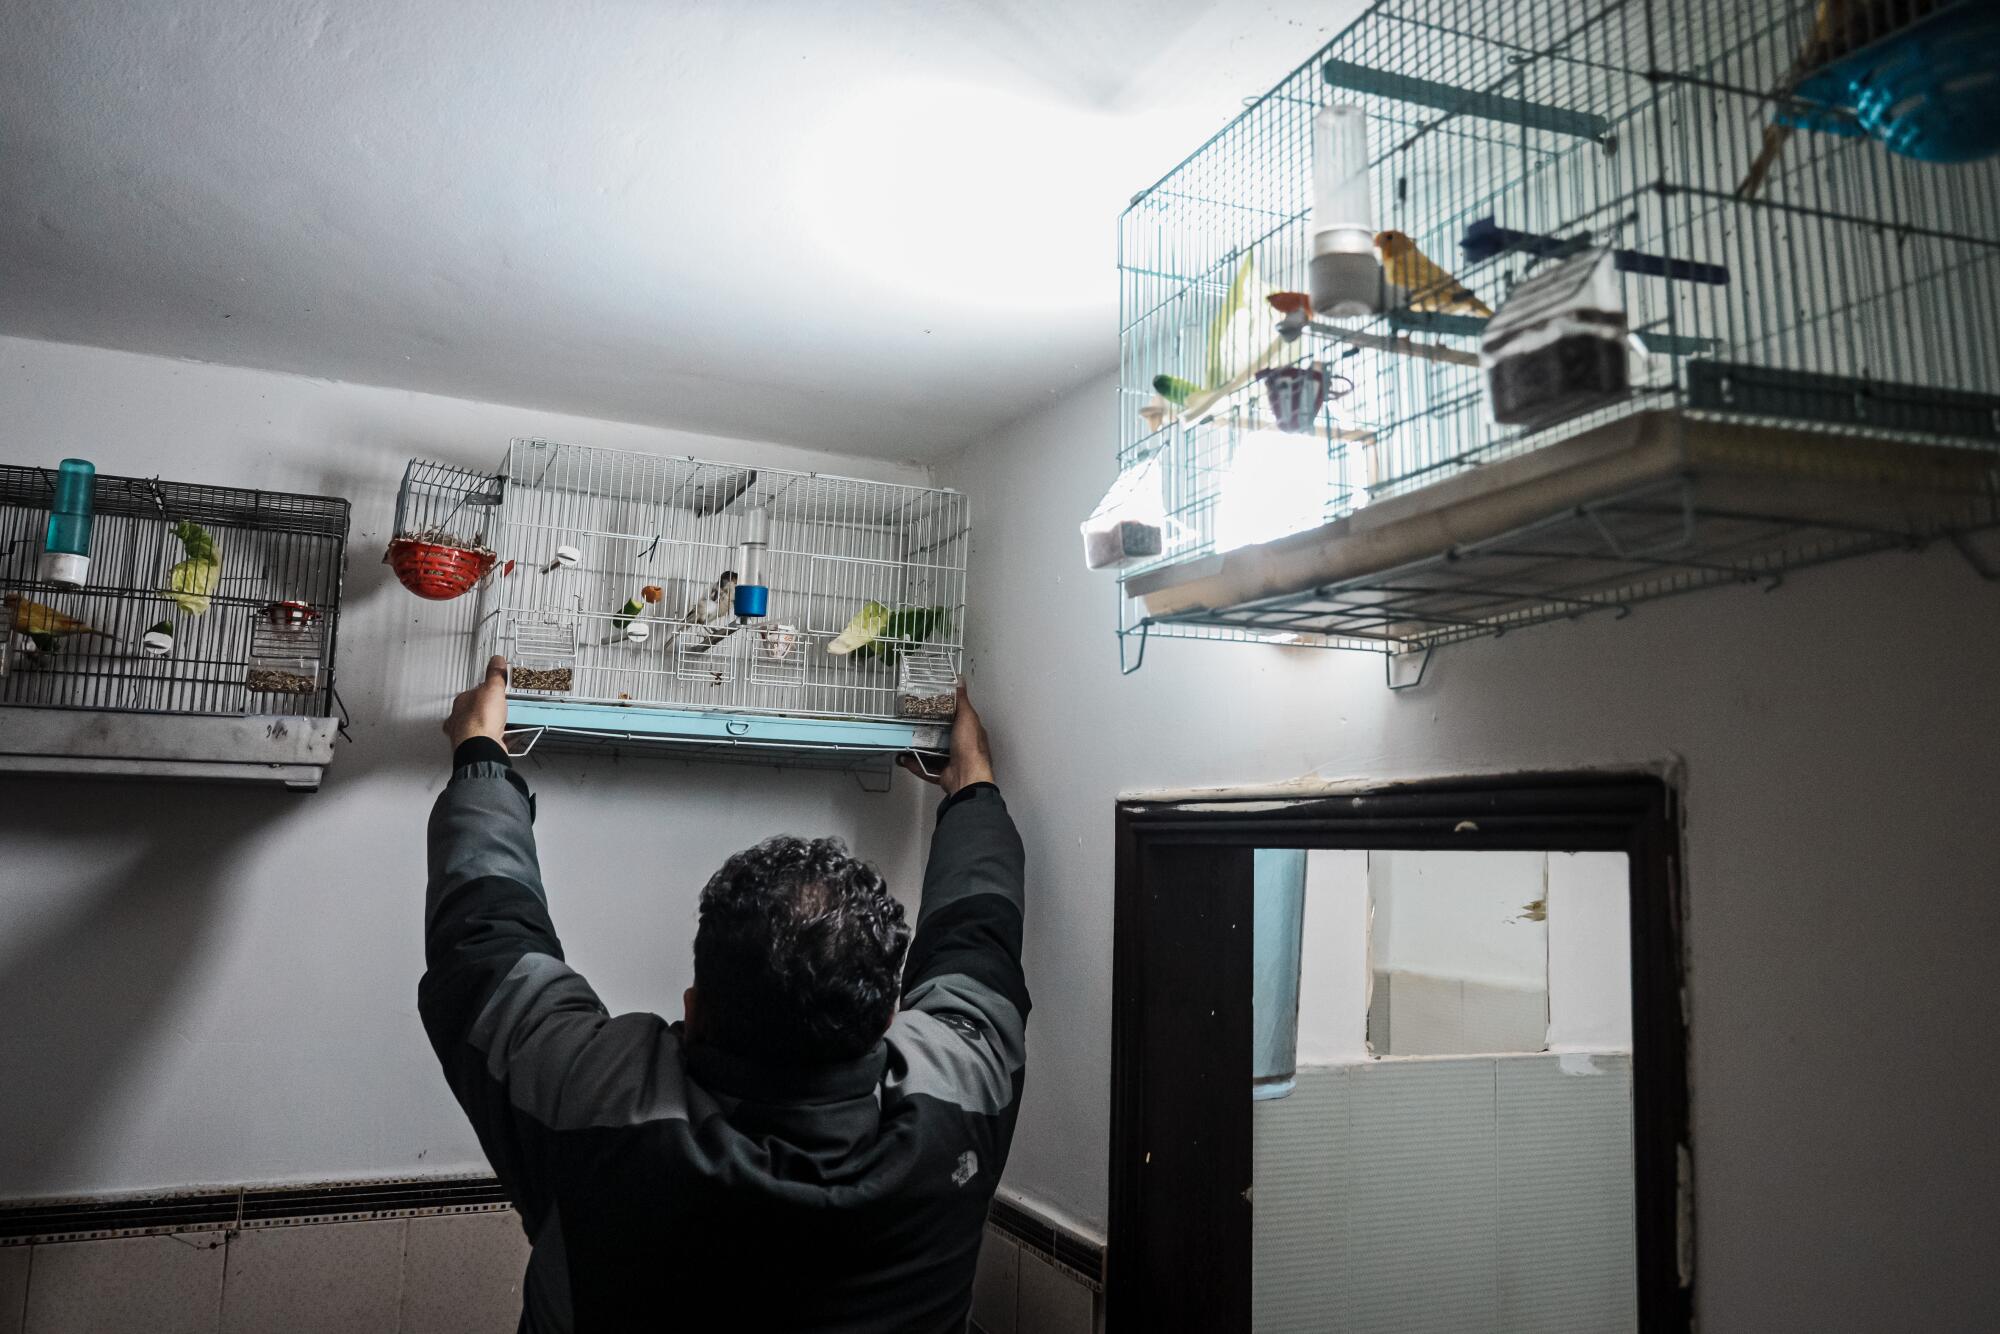 Ahmad abu Alezz tends to songbirds in several cages high on the wall of his home.